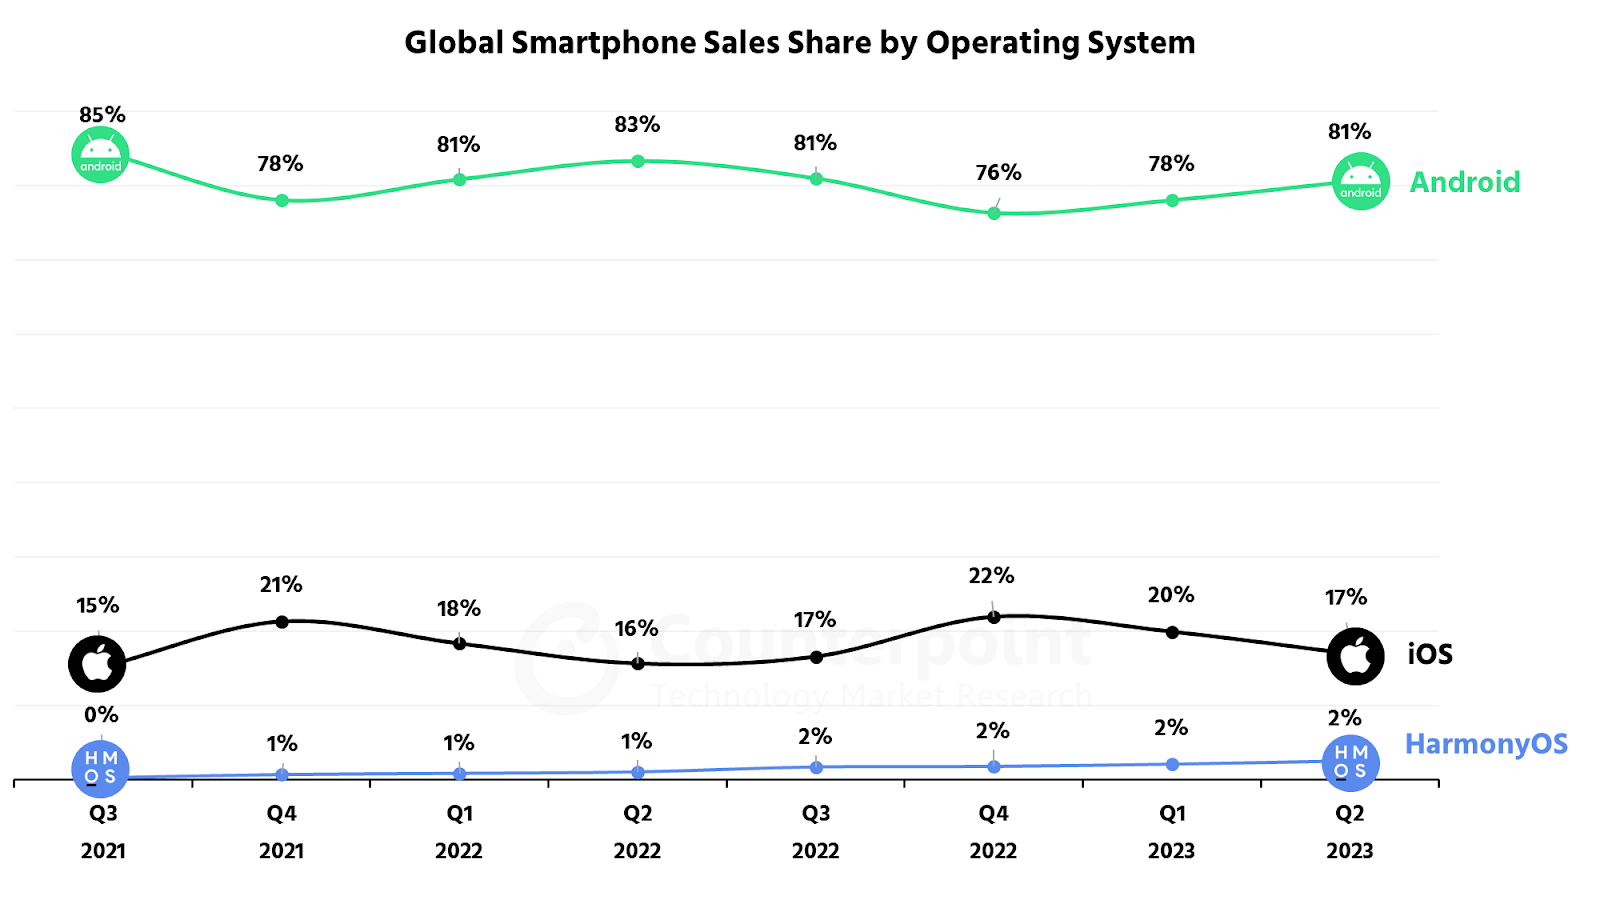 Global smartphone market share by operating system